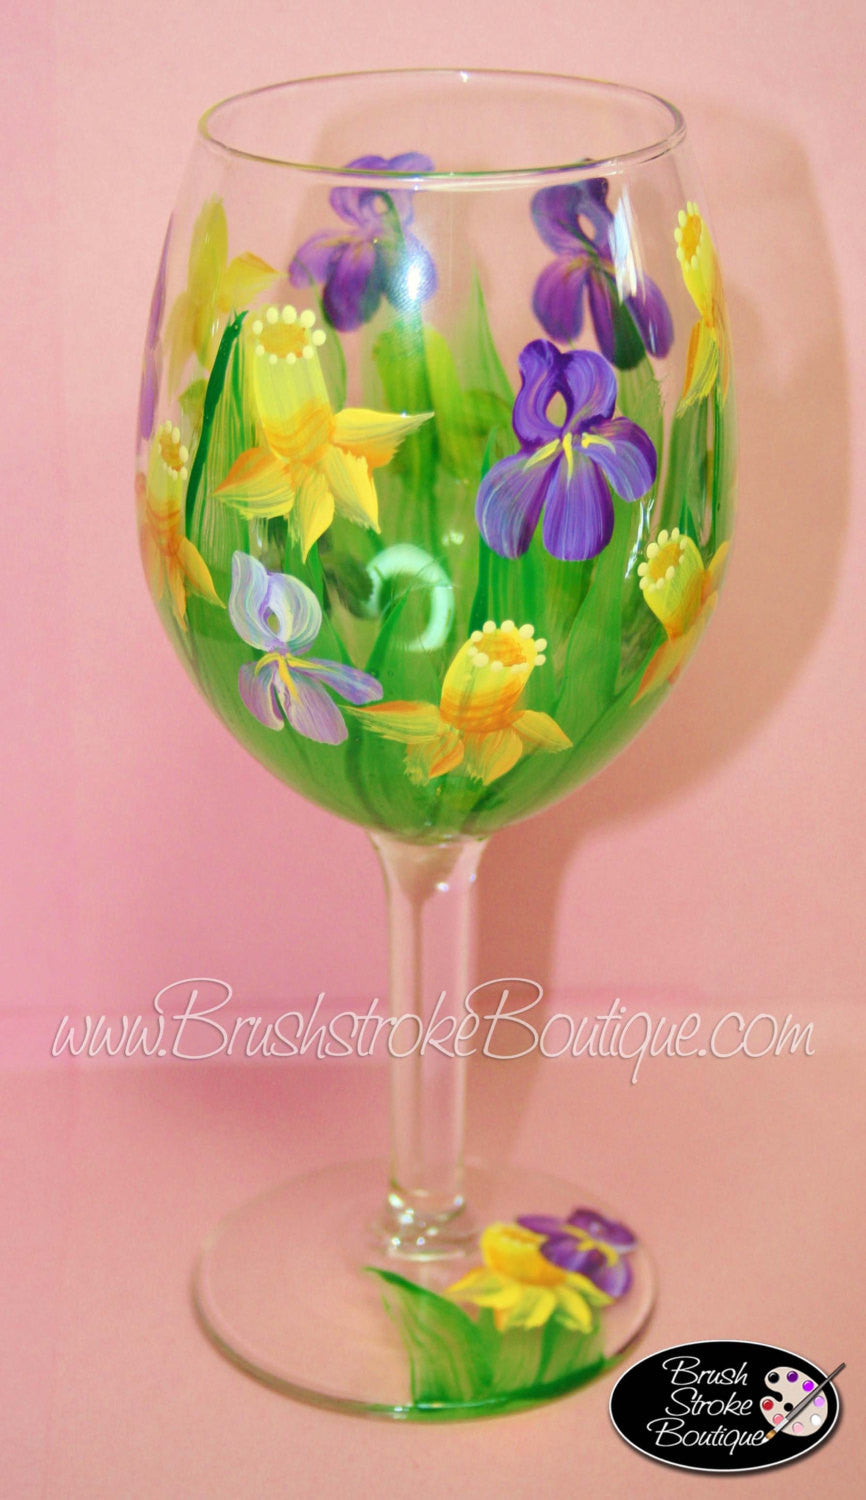 Hand Painted Wine Glass - Daffodils and Irises - Original Designs by Cathy Kraemer